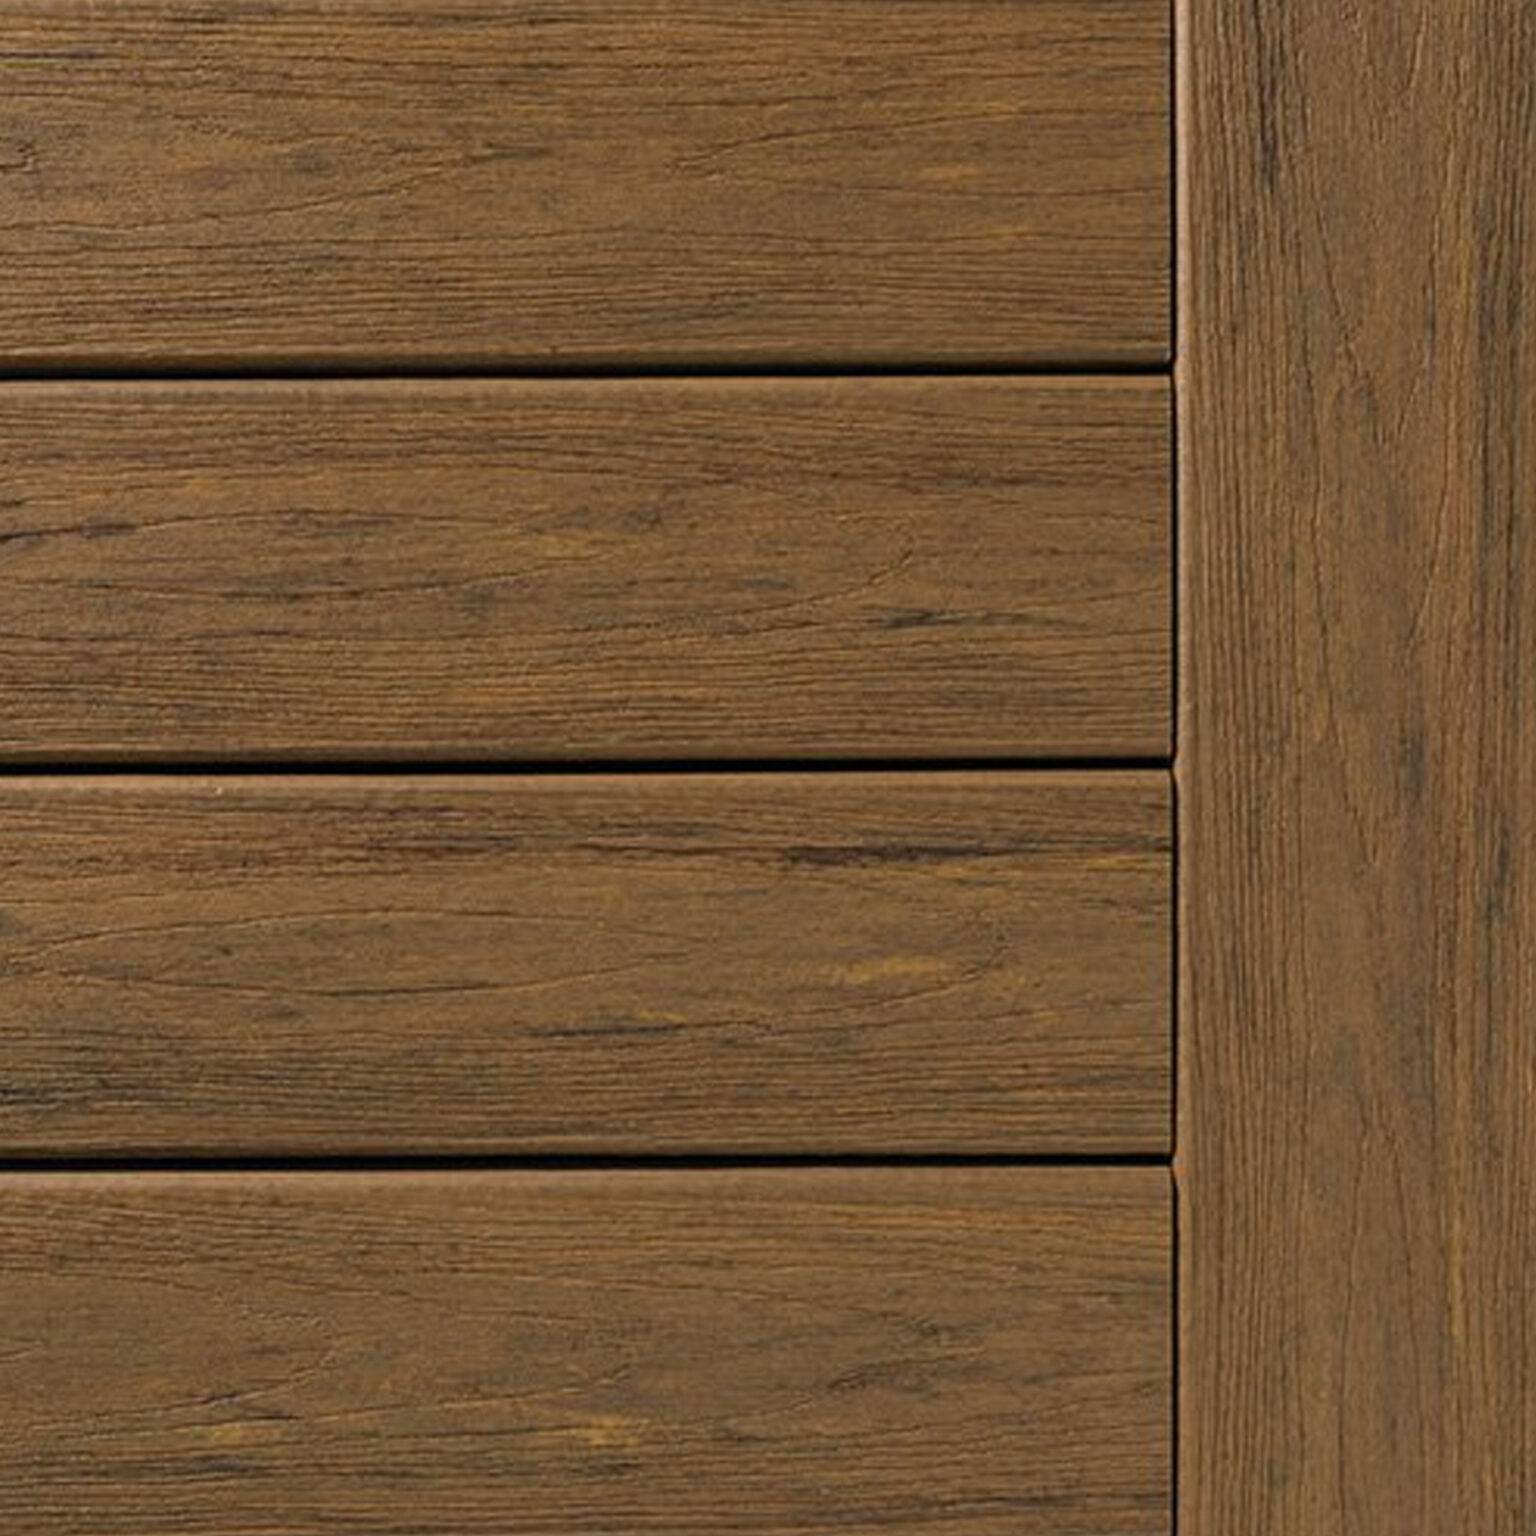 TimberTech Antique Leather - The Deck Store